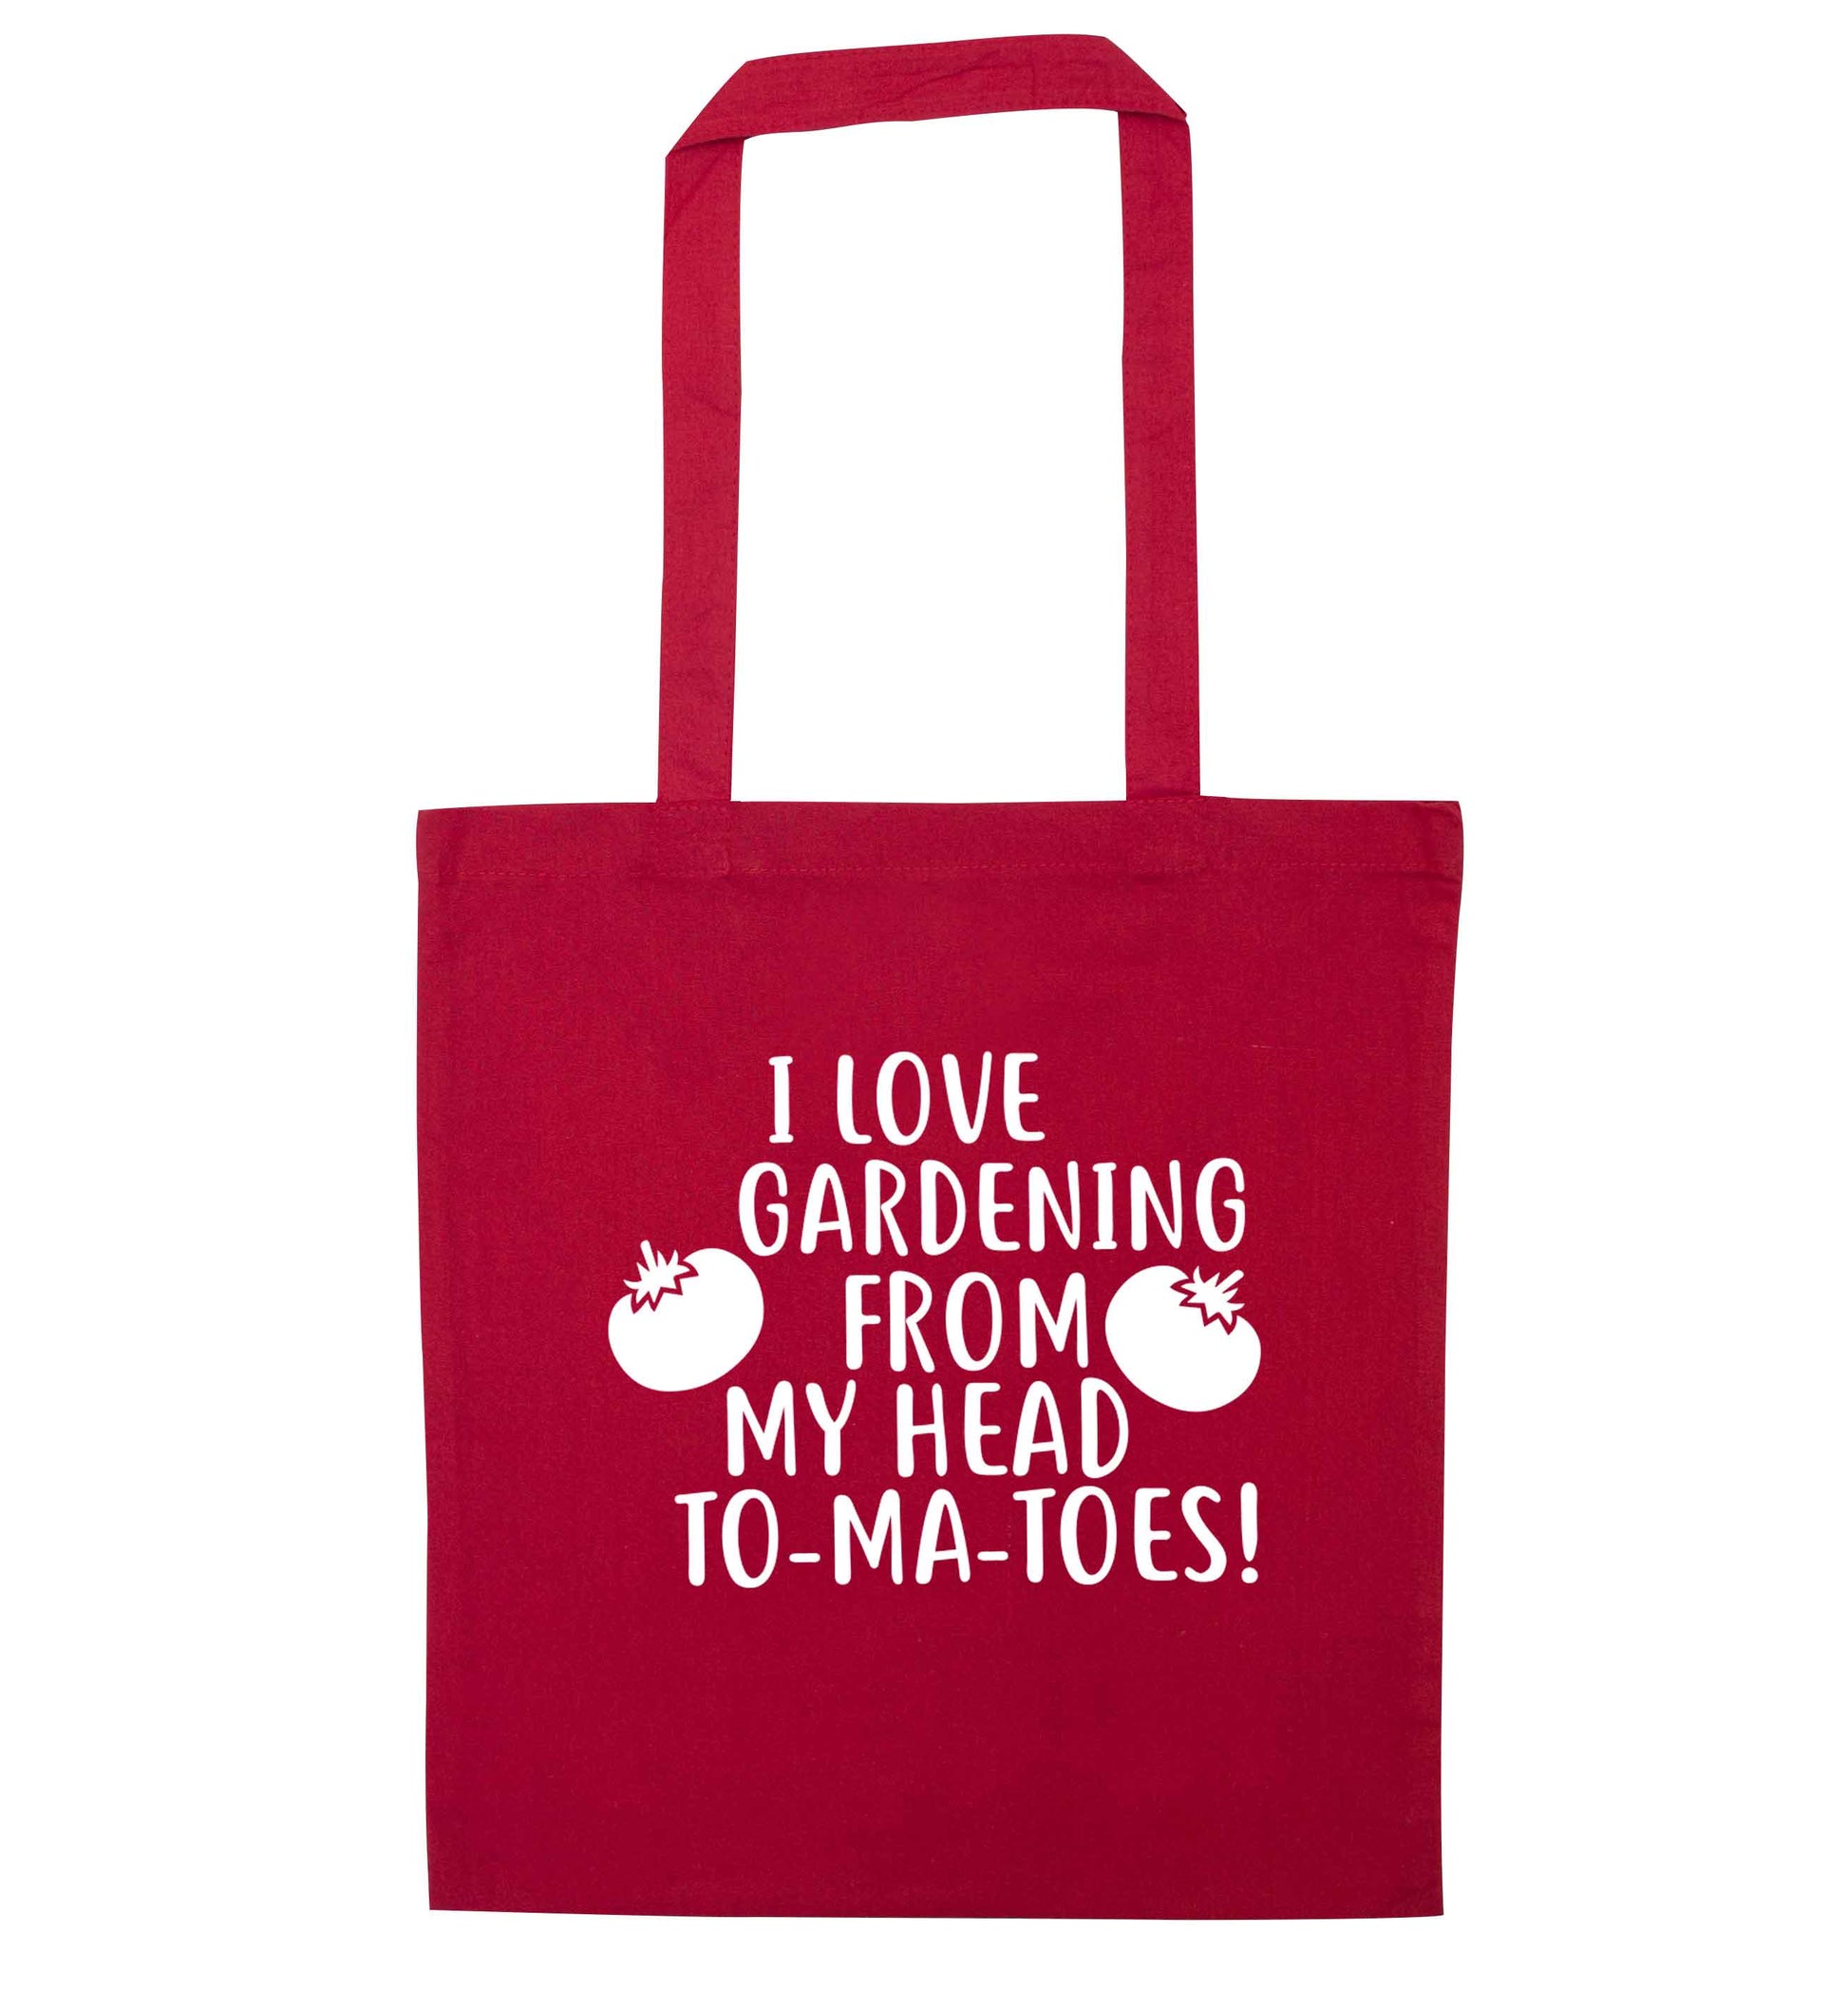 I love gardening from my head to-ma-toes red tote bag